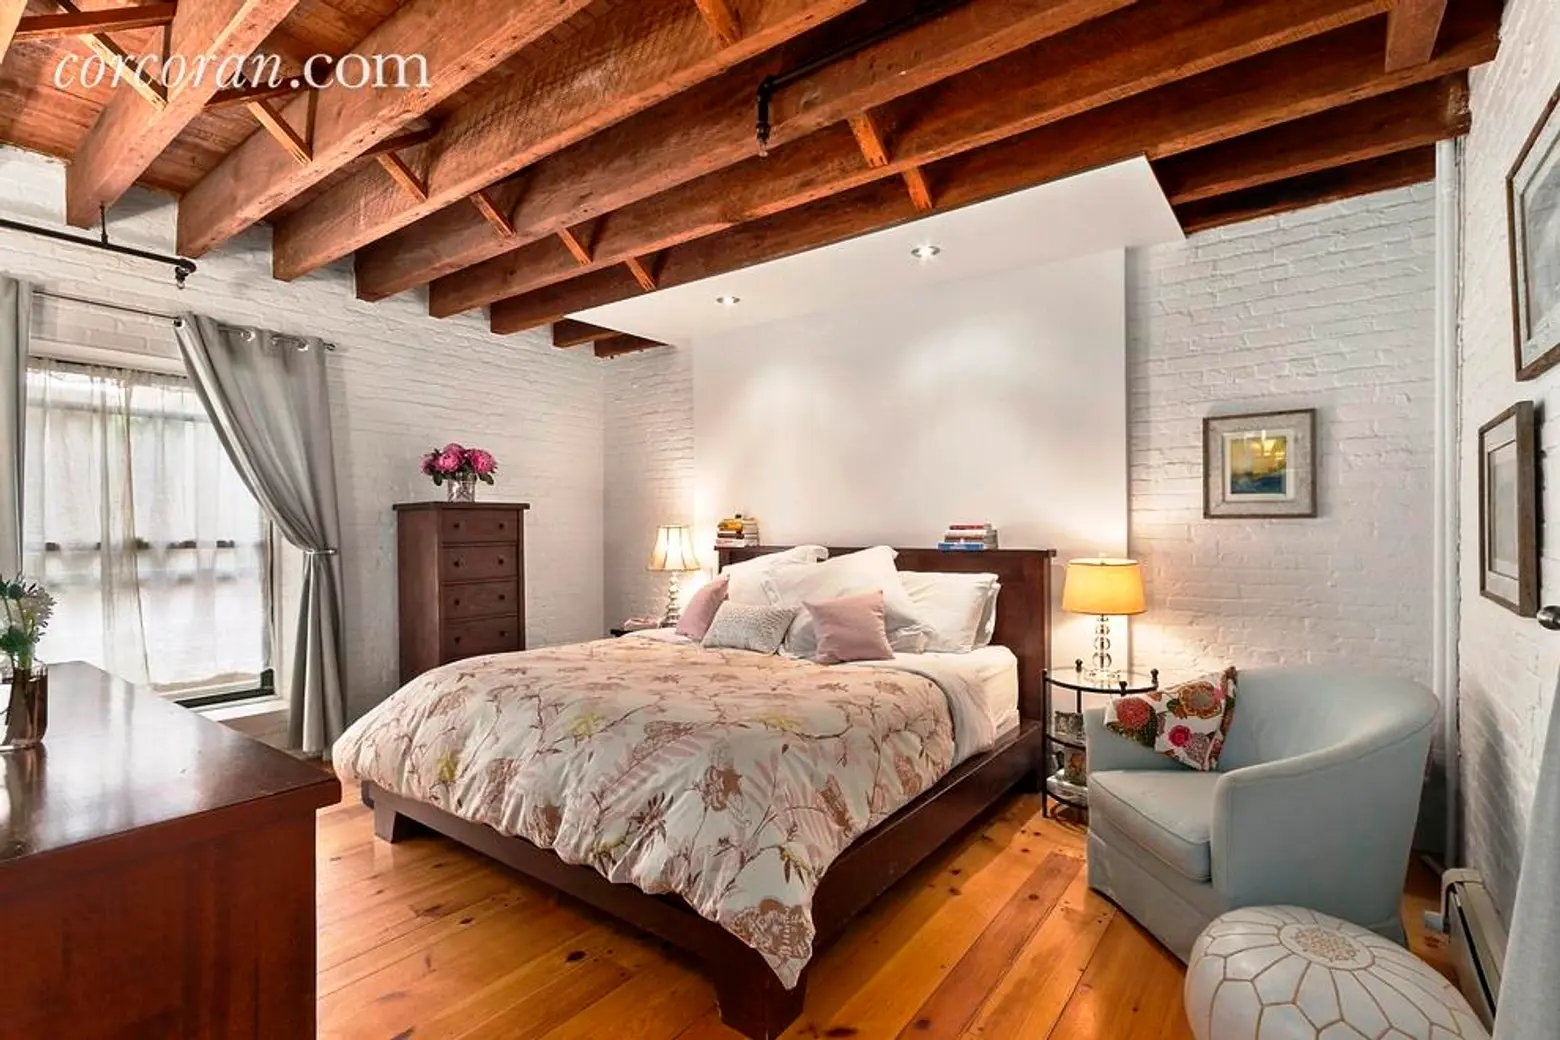 211 east 2nd street, the carriage house, rental, east village, master bedroom